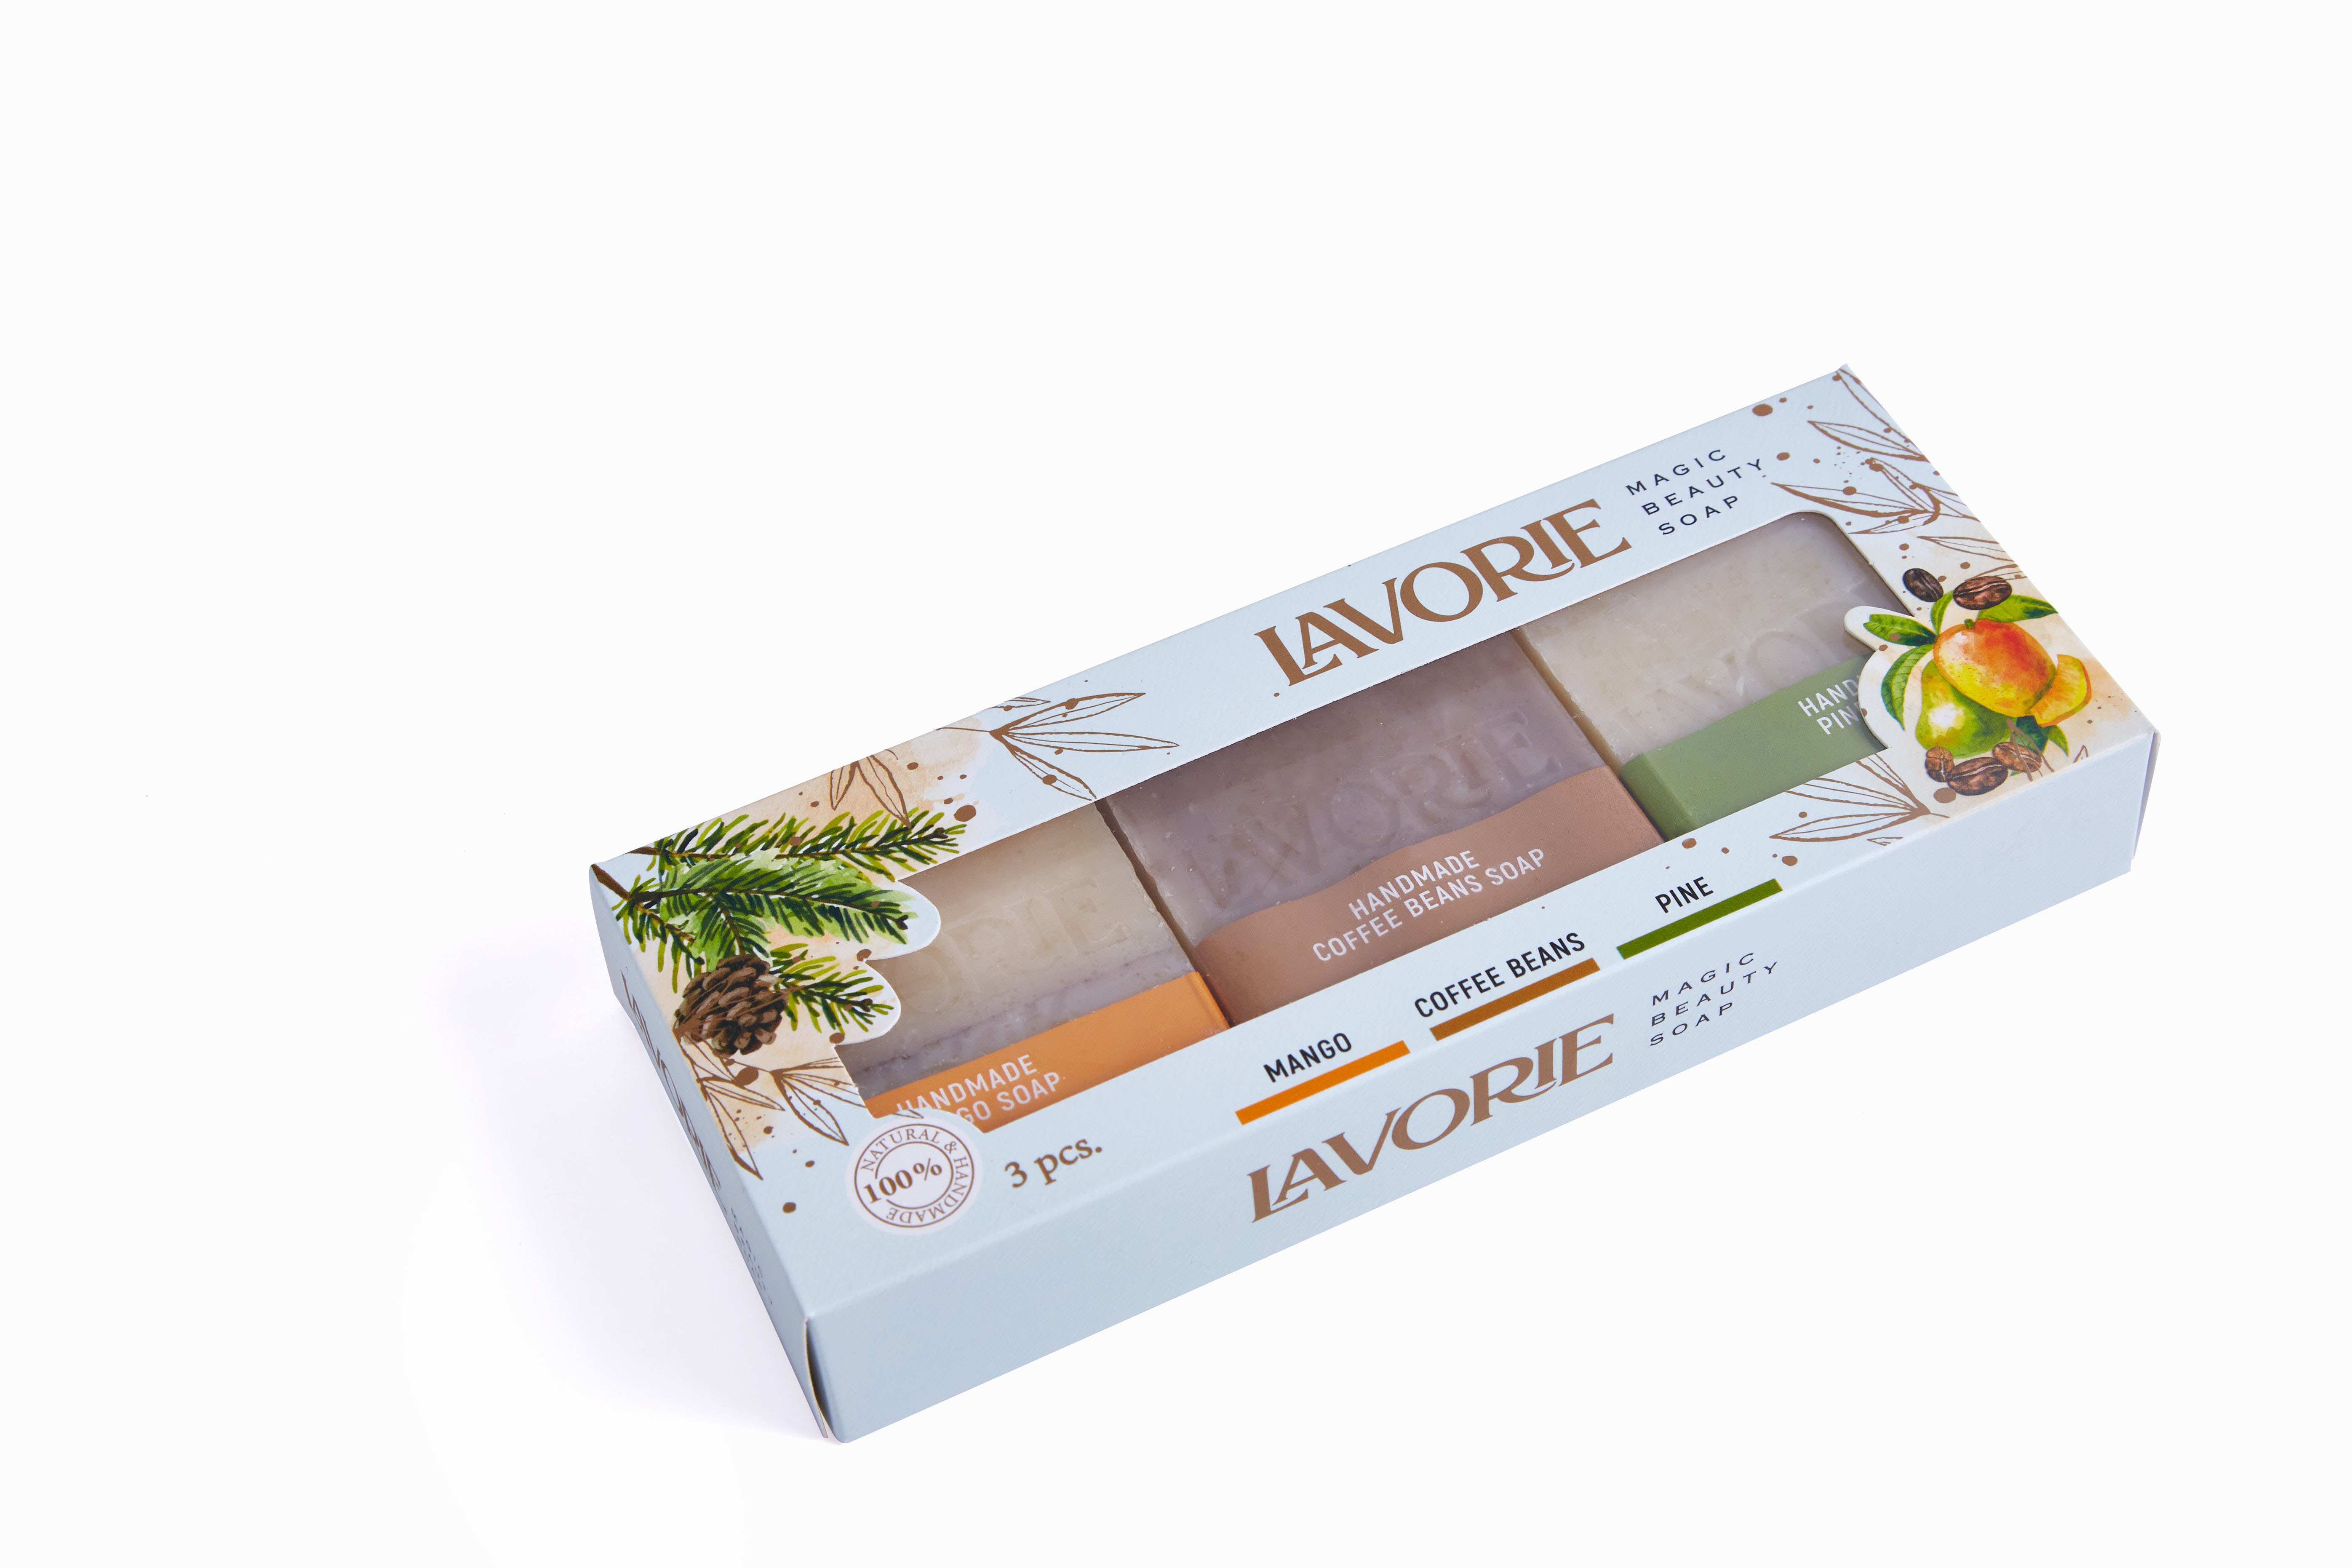 LAVORIE MANGO OLIVE OIL & COFFEE BEAN OLIVE OIL & PINE SOAP 